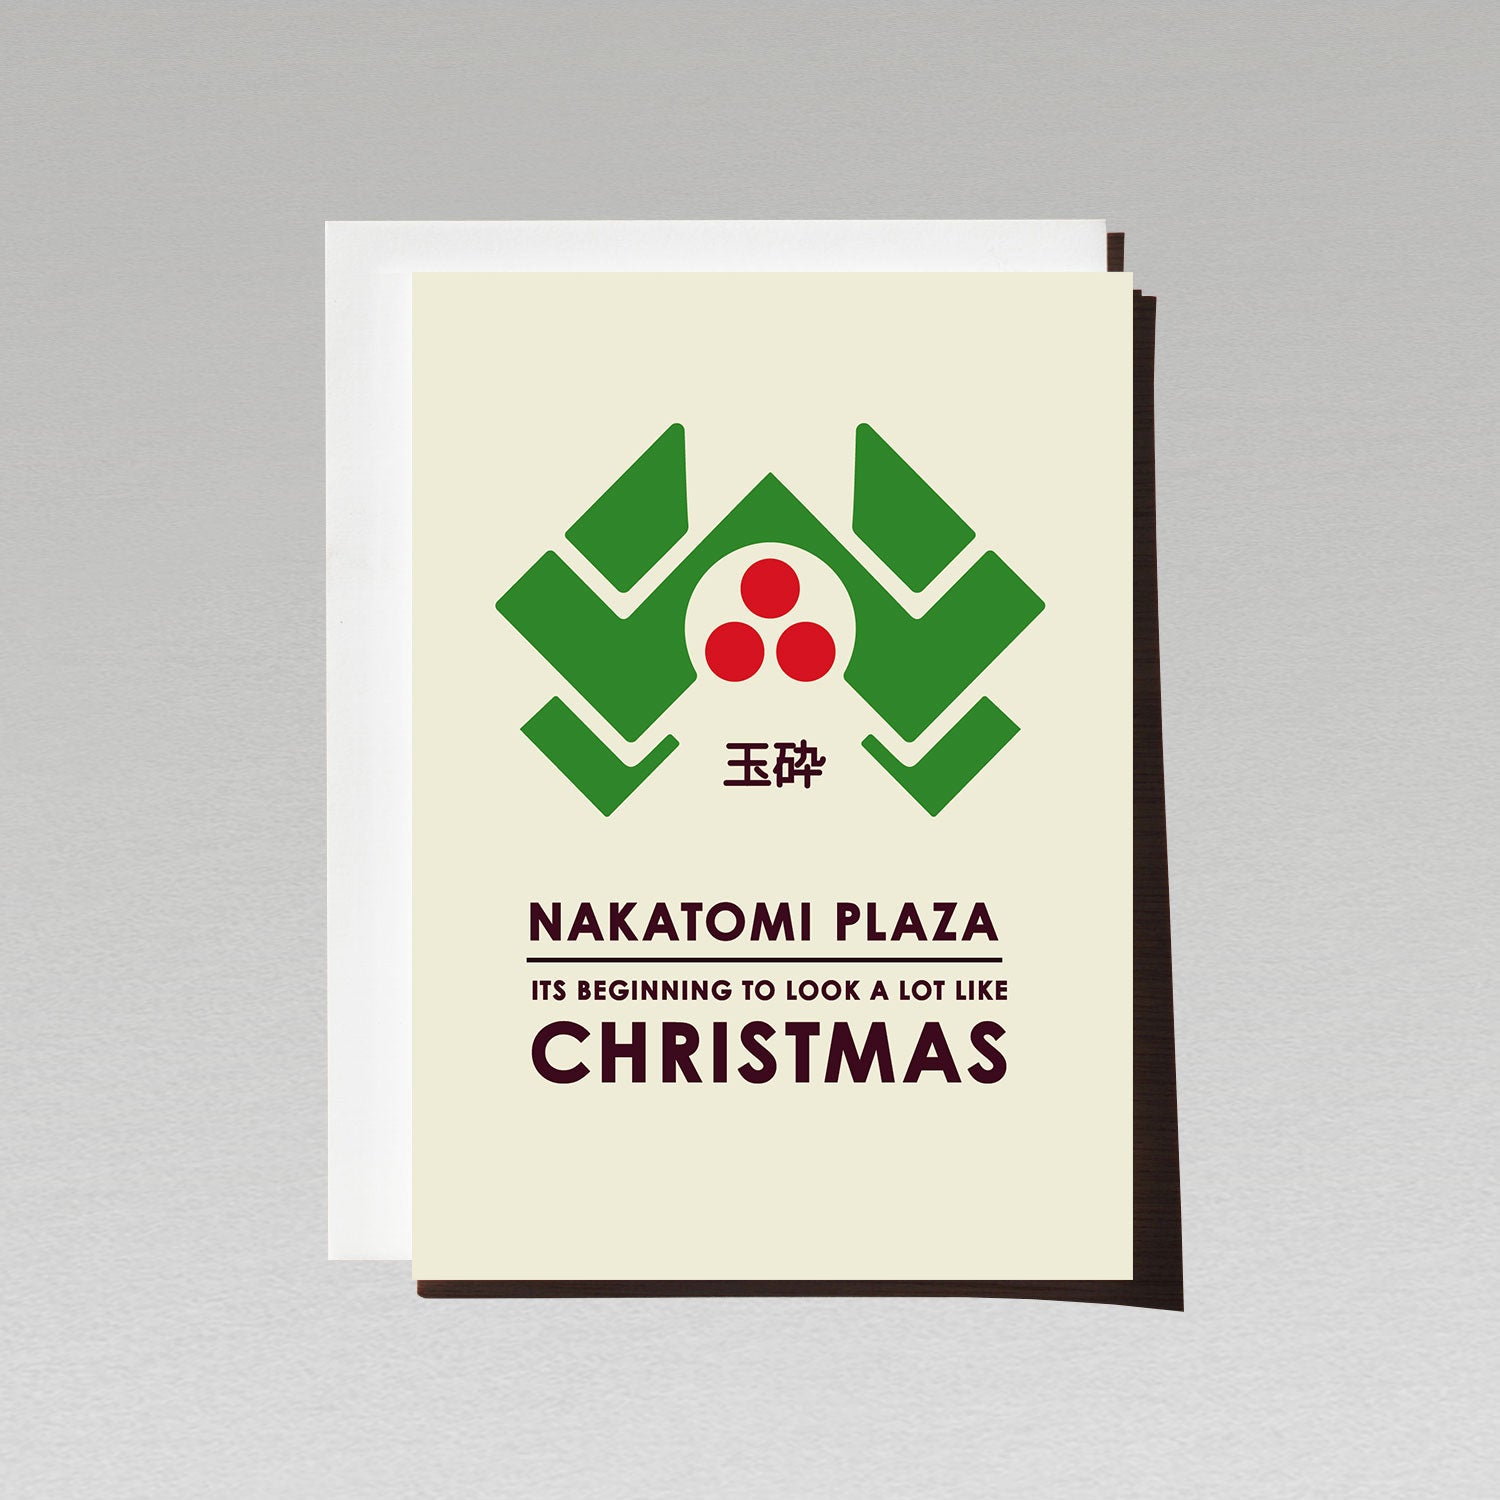 die hard christmas card with green nakatomi plaza with three red dots with text its beginning to look a lot like christmas